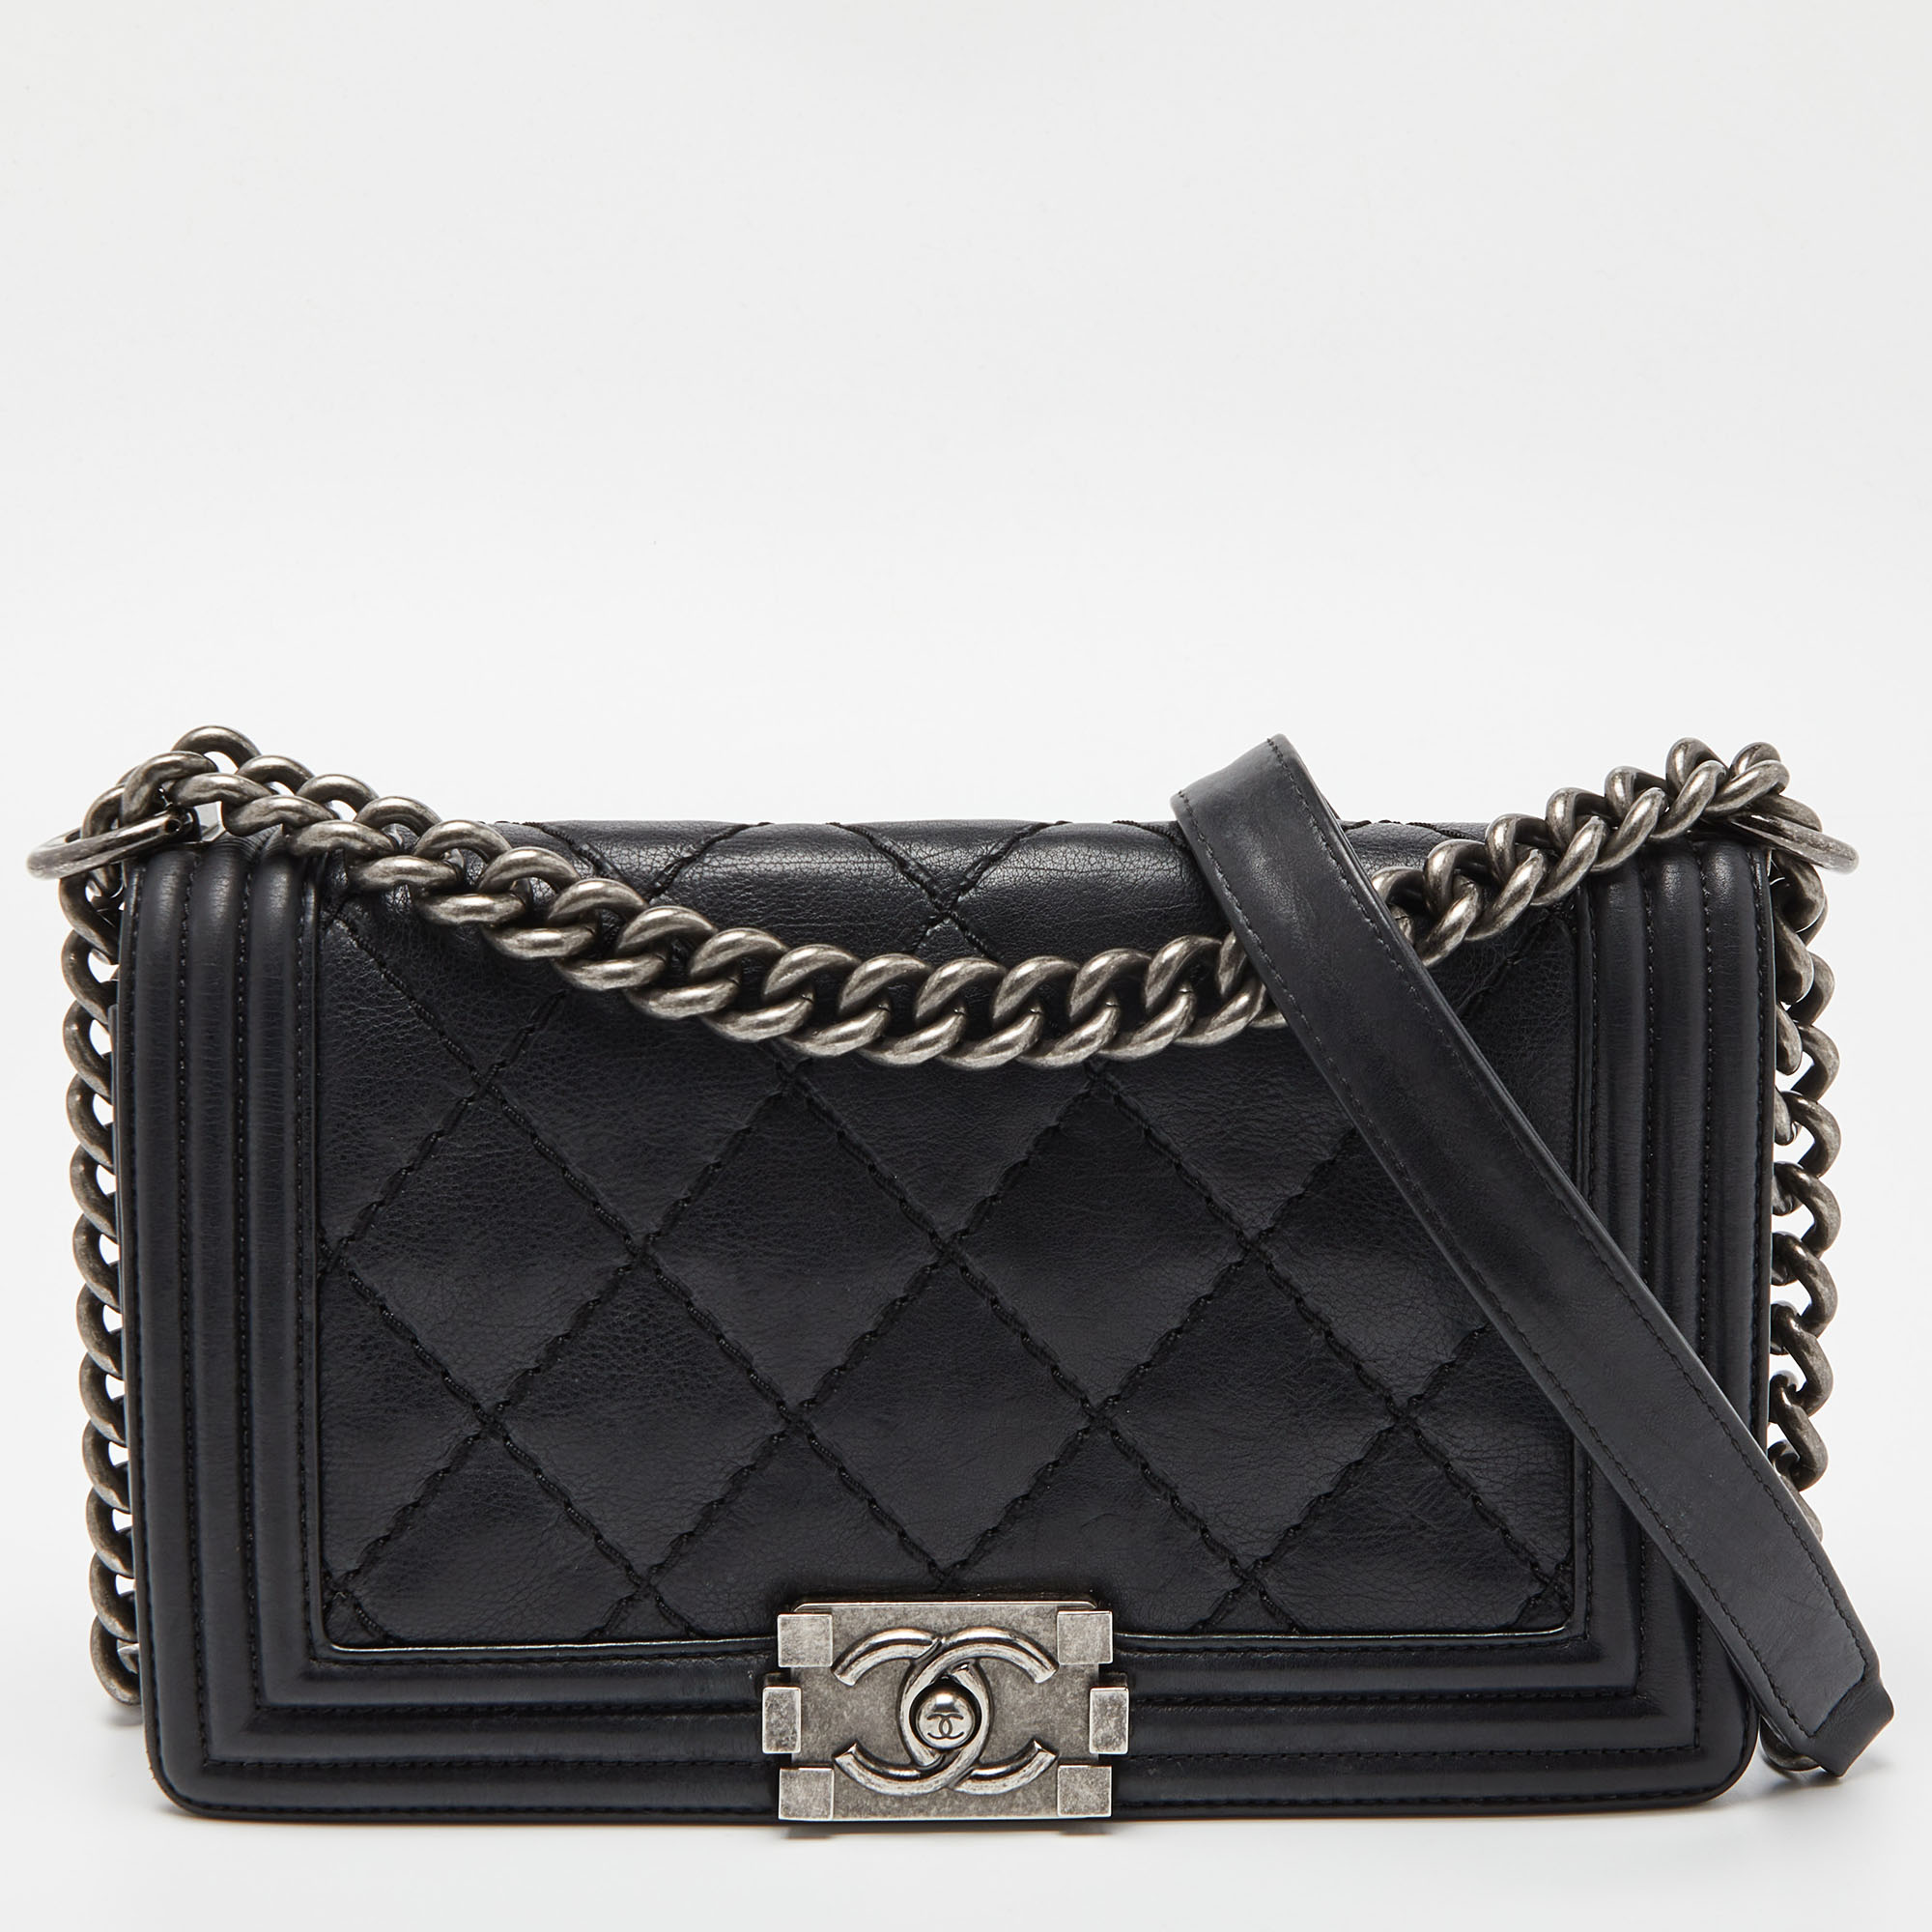 

Chanel Black Quilted Leather Medium Double Stitch Boy Flap Bag